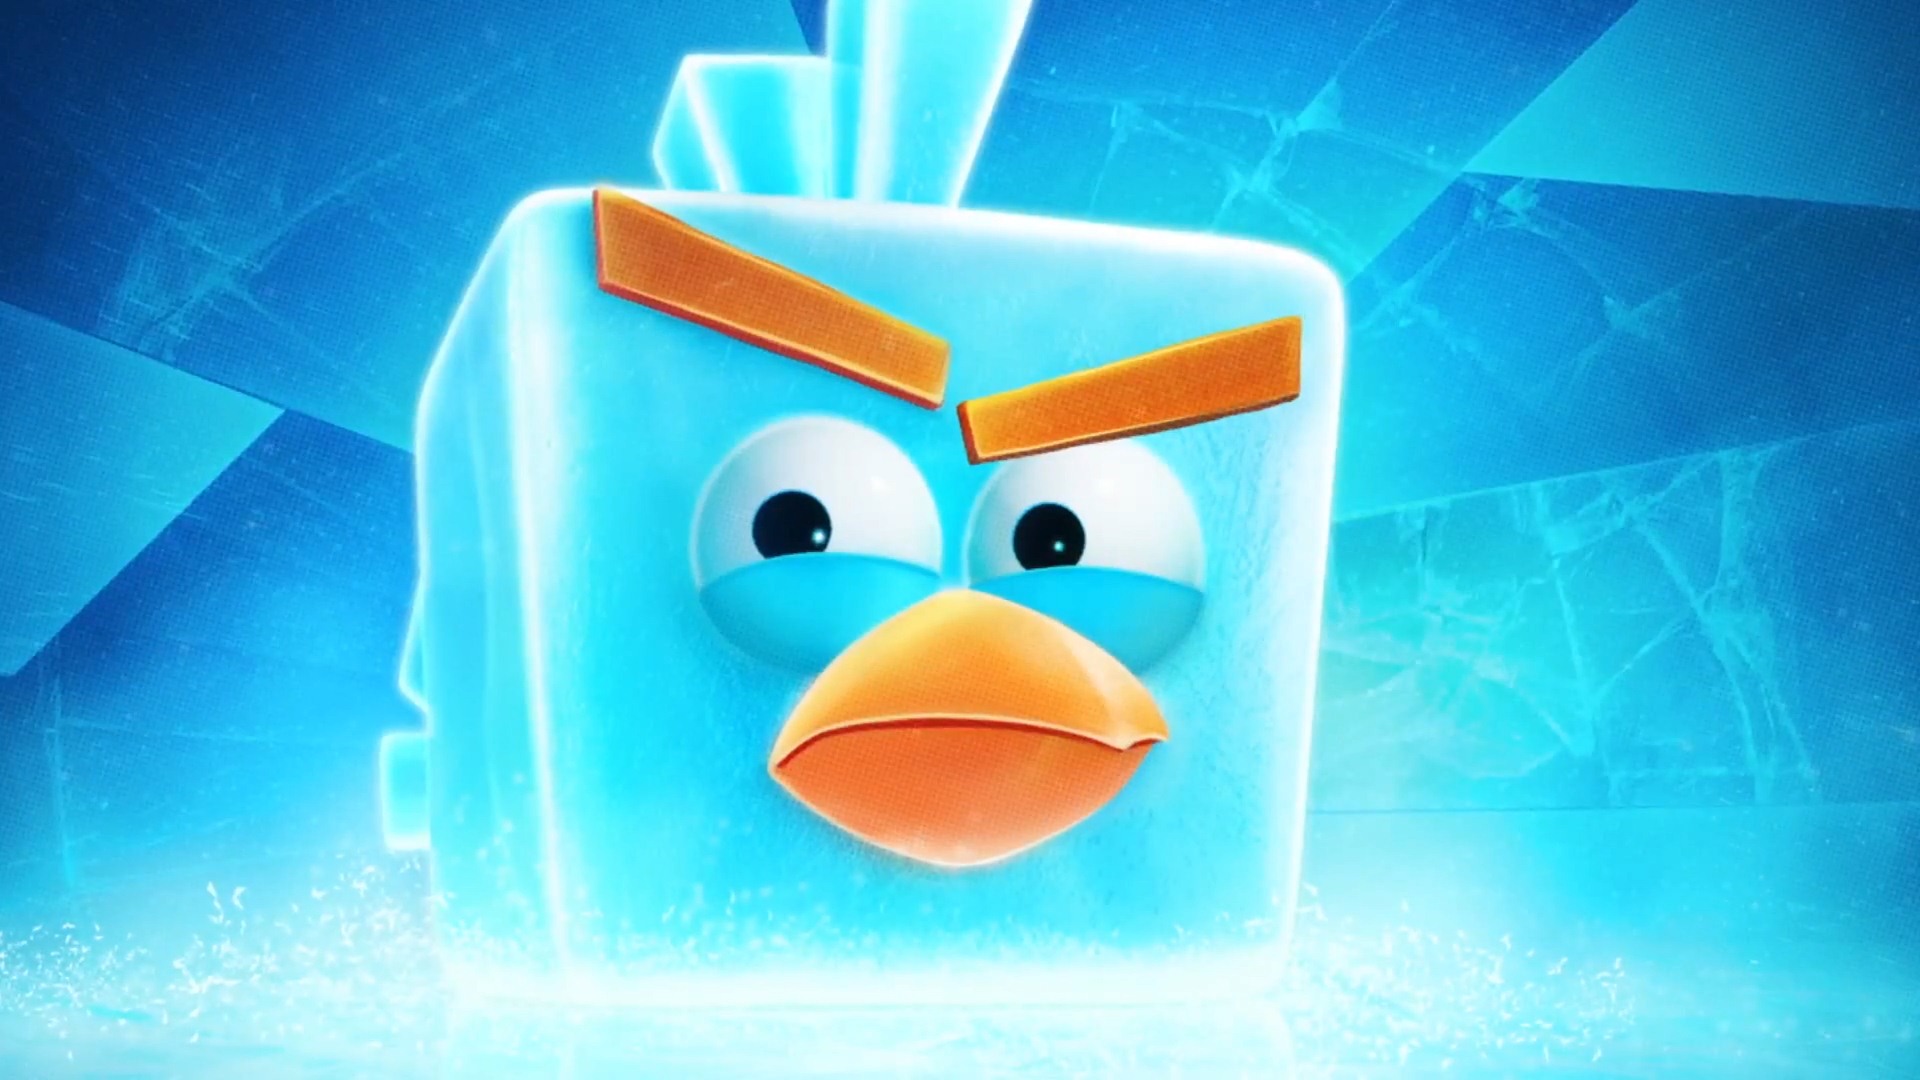 Angry Birds Spiel wallpapers #25 - 1920x1080